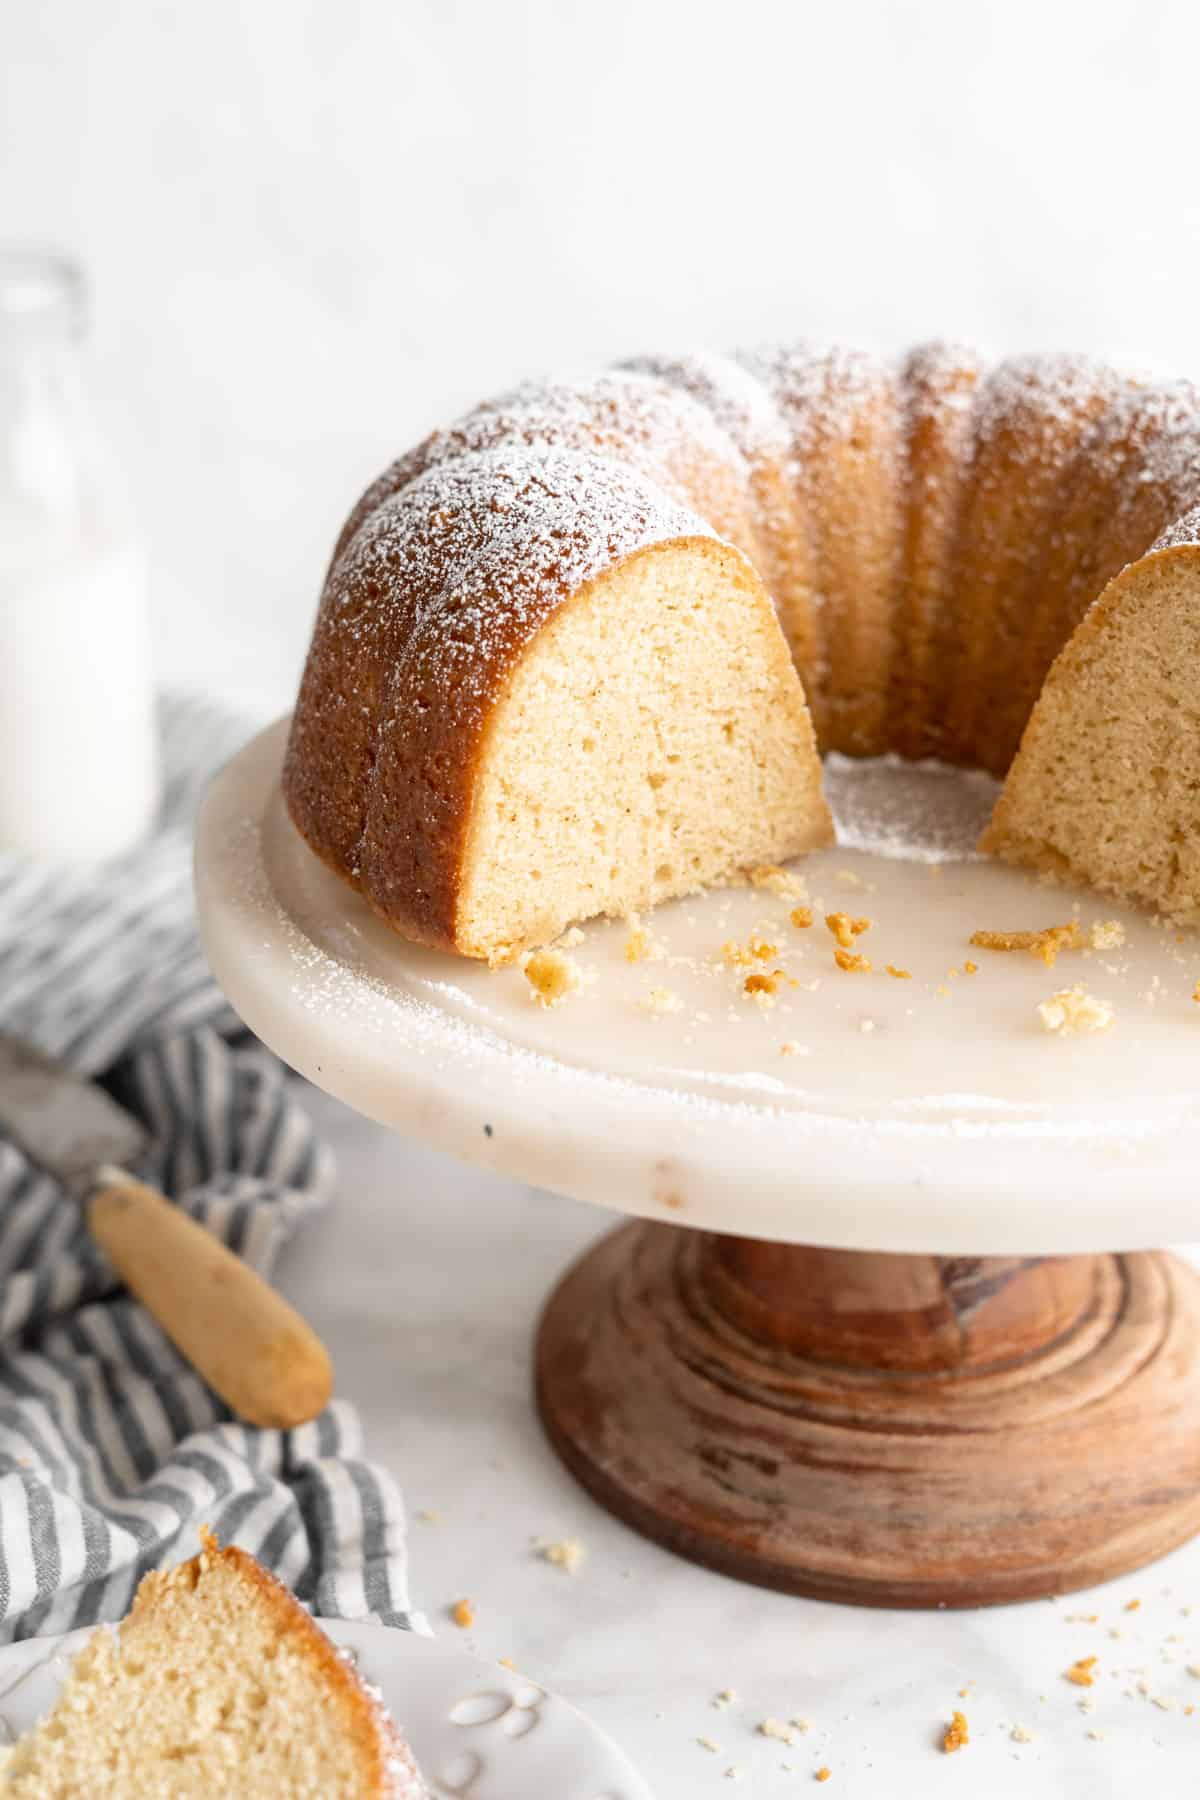 Sliced browned butter cake on cake stand with crumbs and a peak of a slice of cake on a plate.